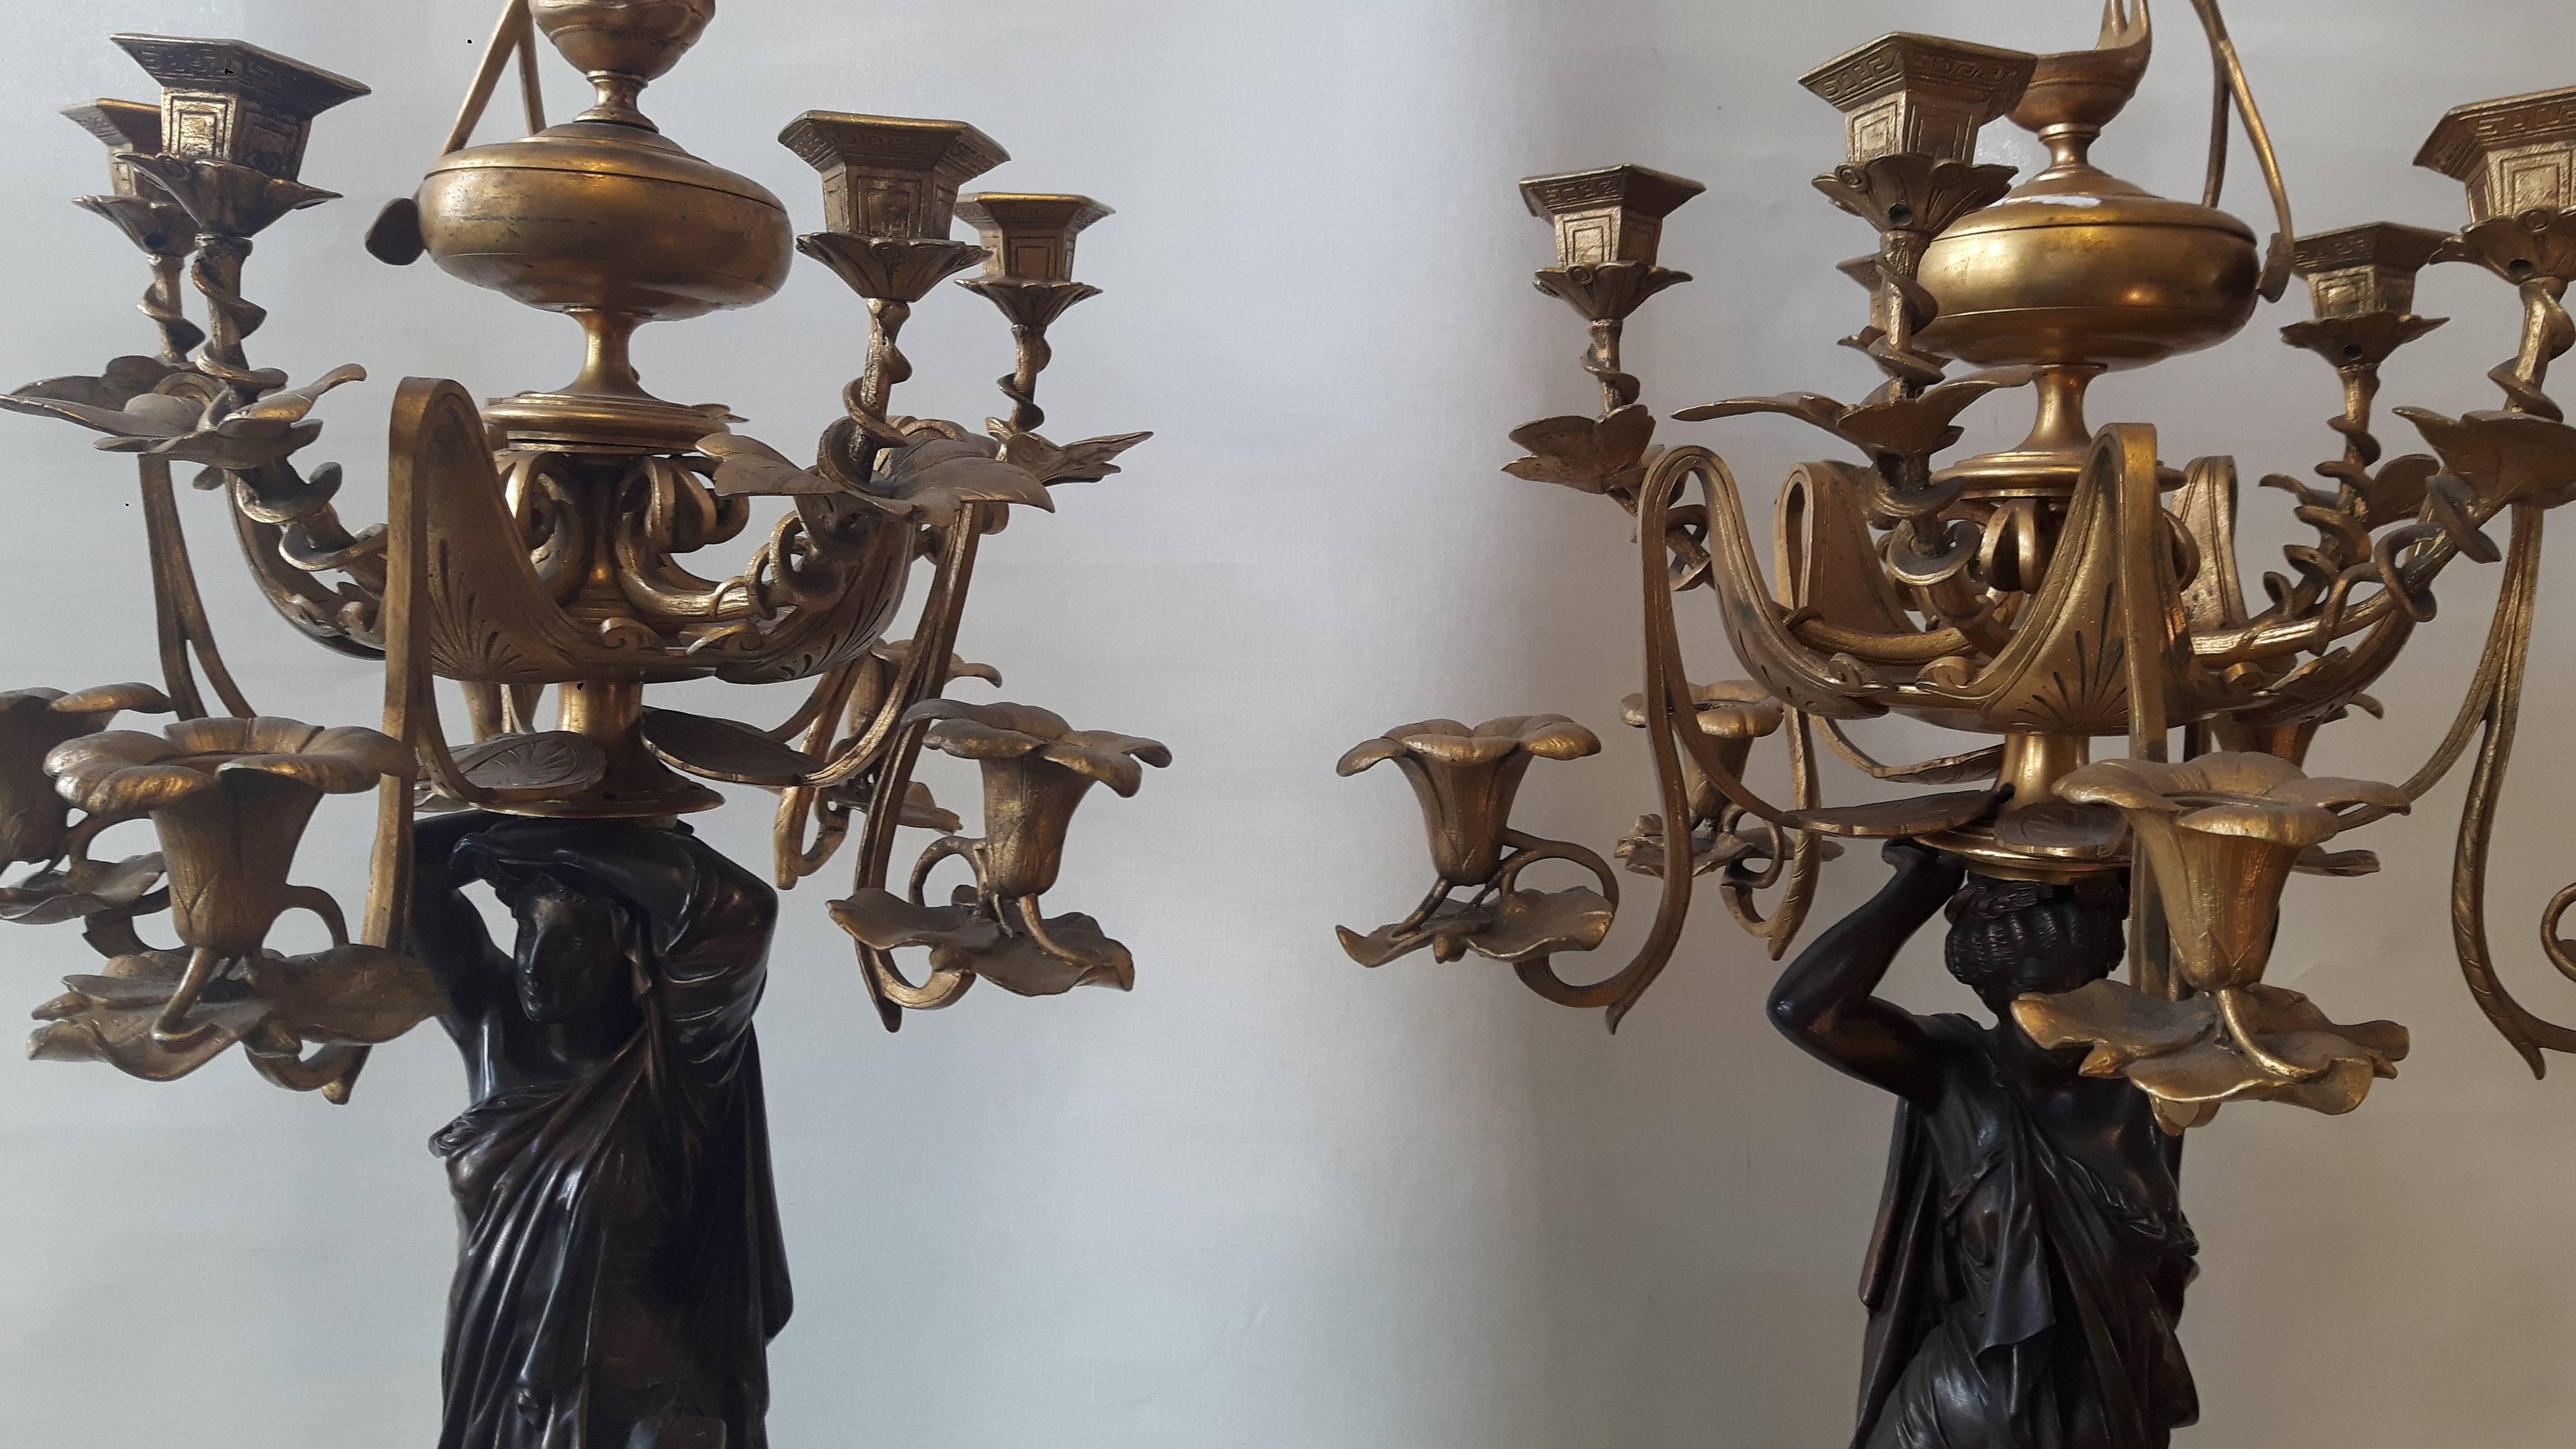 A very large pair of bronze and gilt candelabra in the shape of Grecian water carriers. The figures rest on a tripod shaped base, of which the feet are depicted as lion's feet adorned by eagle’s heads.